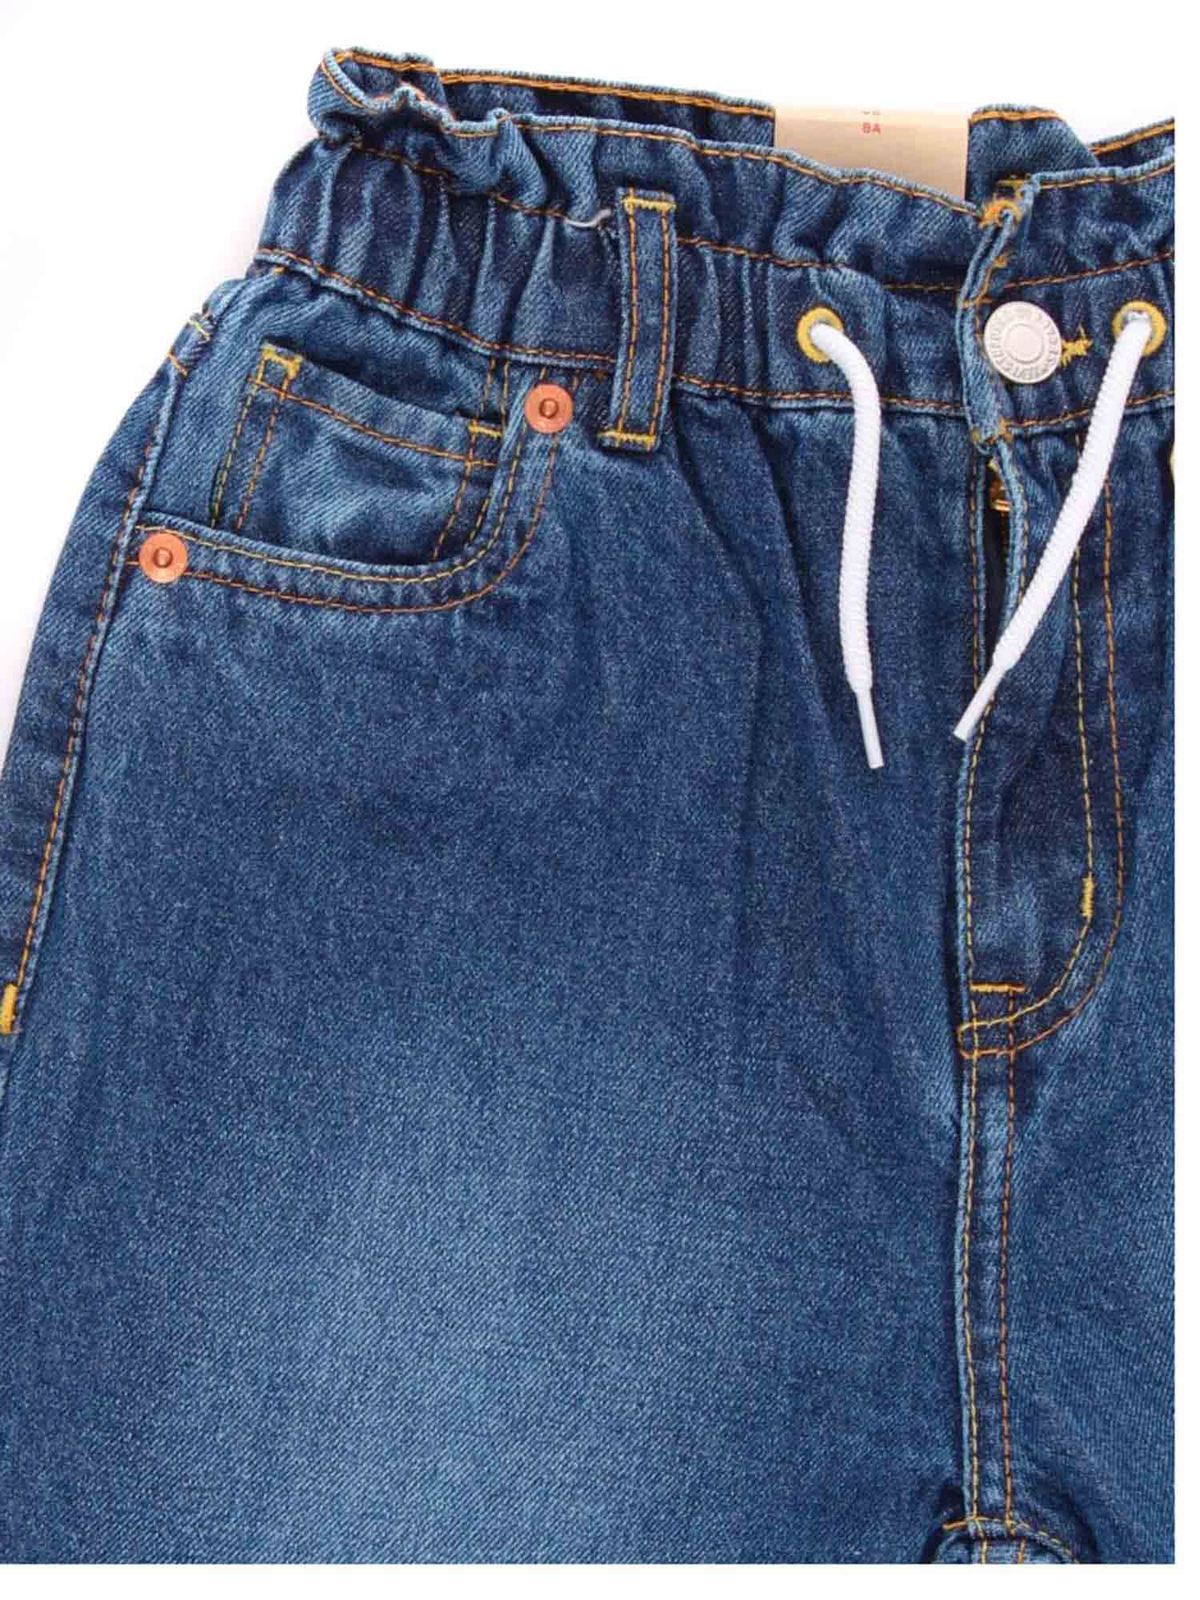 Jeans Levi'S - Elastic and drawstring jeans in blue - 3EC881MA5